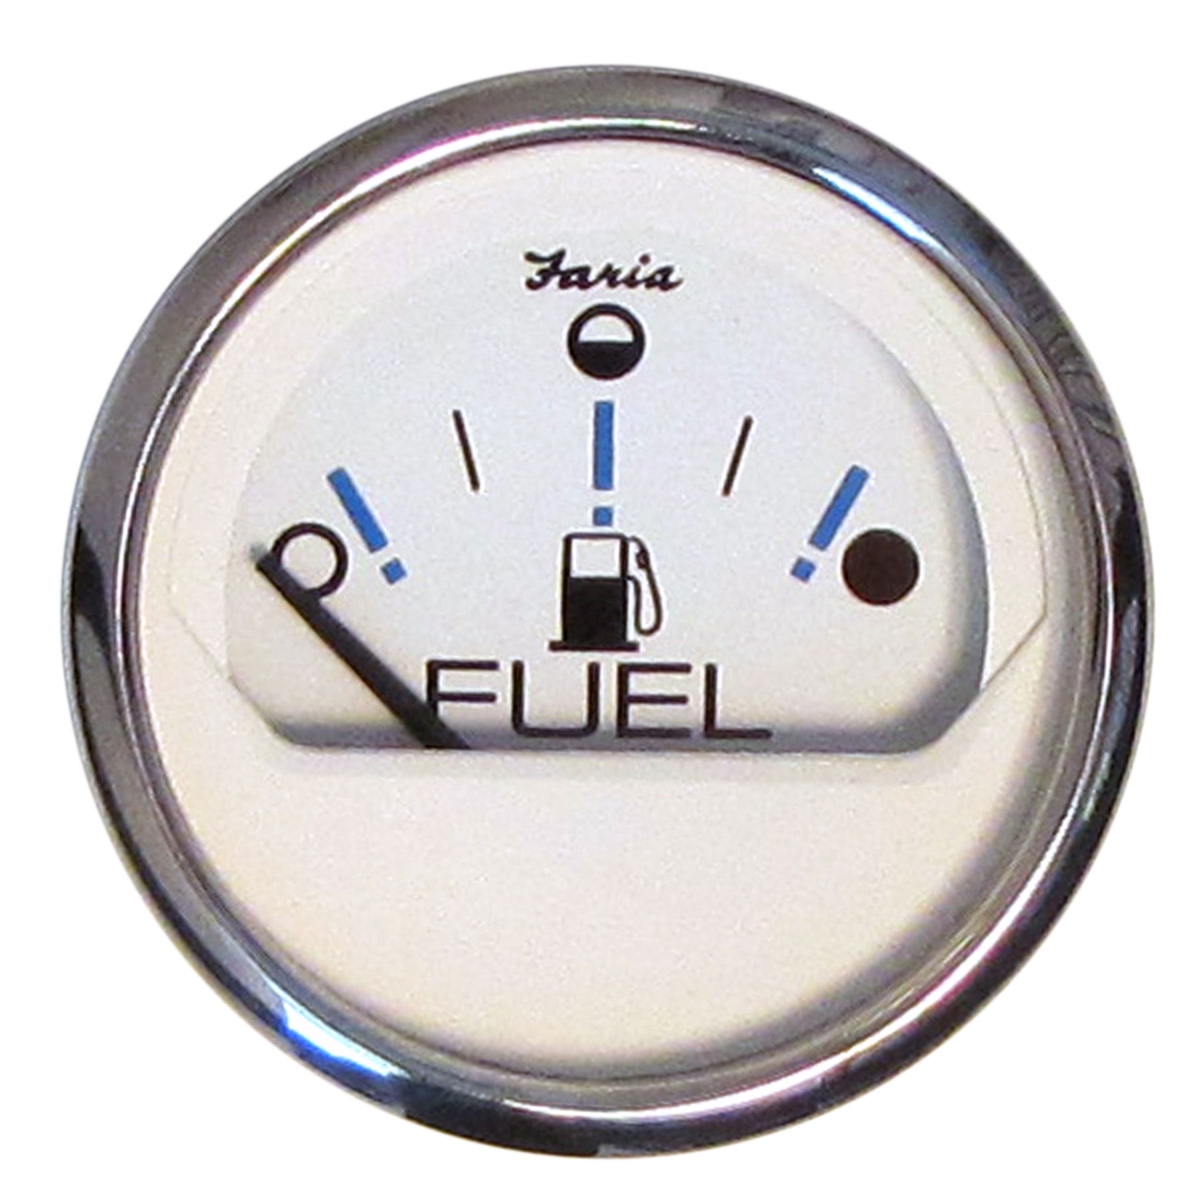 Picture of Faria 3003.3822 13818 Chesapeake Fuel Level Gauge, White Stainless Steel - 2 in.